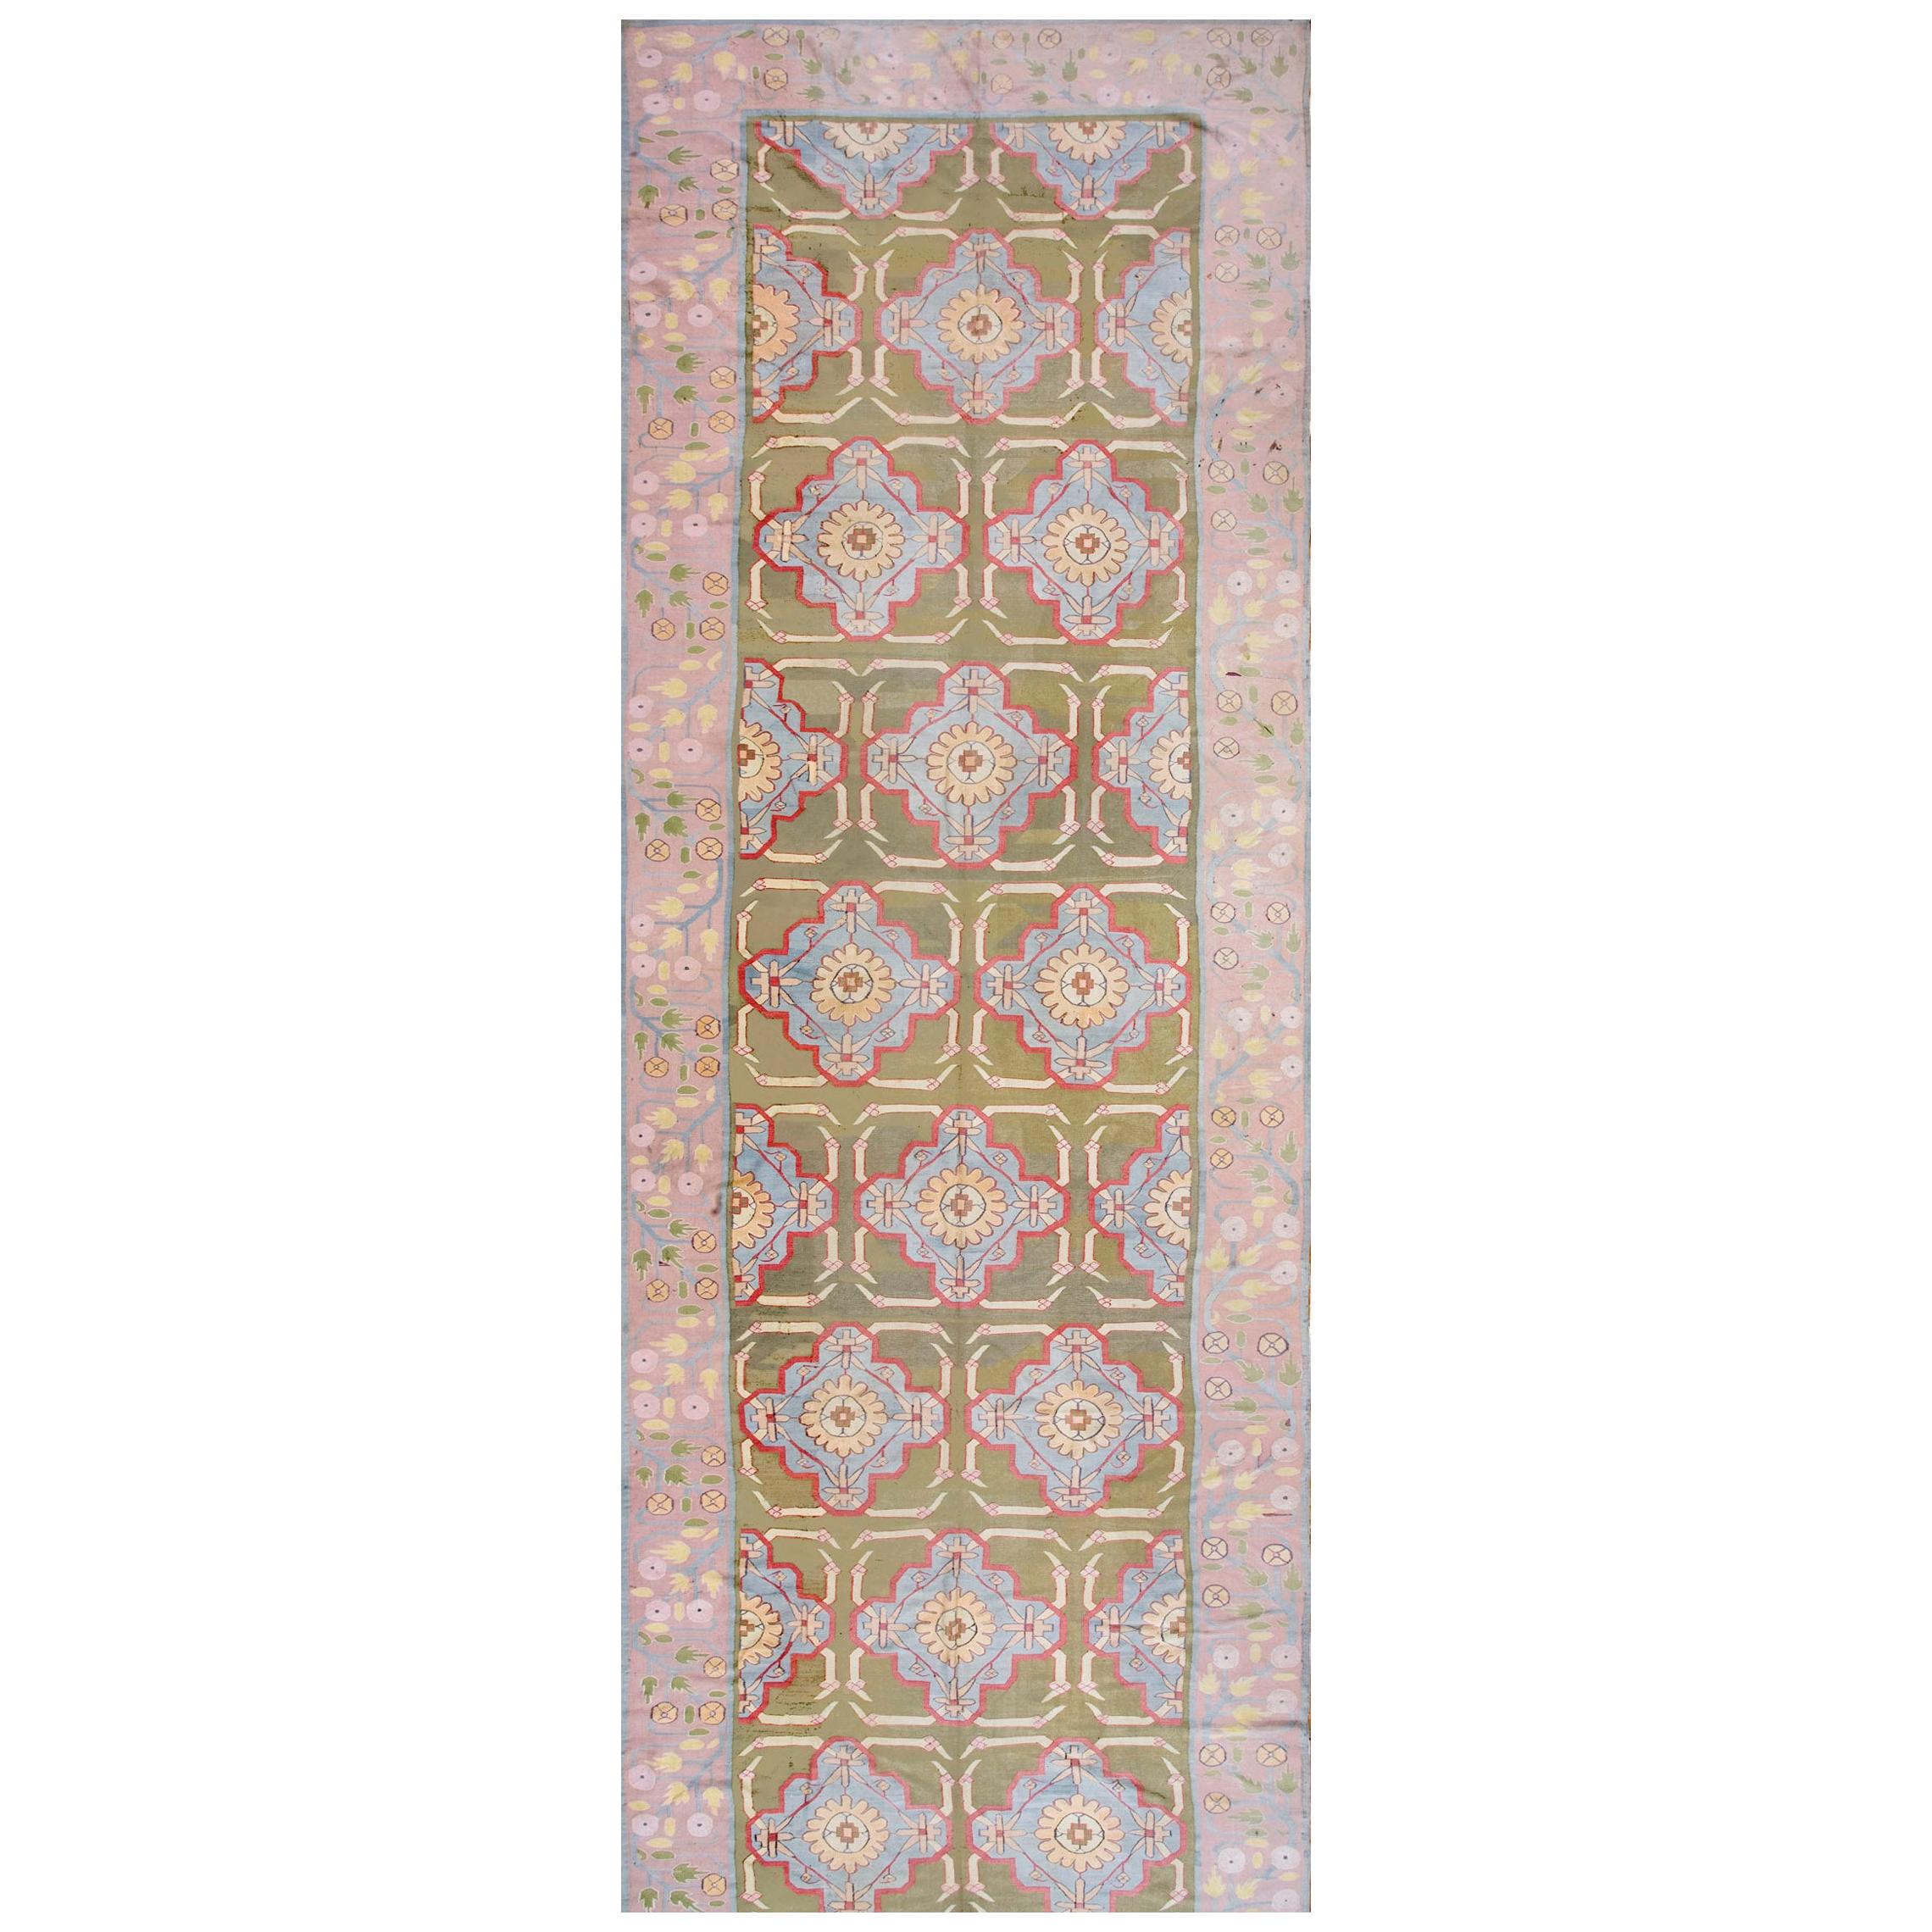 Early 20th Century Indian Cotton Dhurrie Carpet ( 6'8" x 28'2" - 203 x 860 )